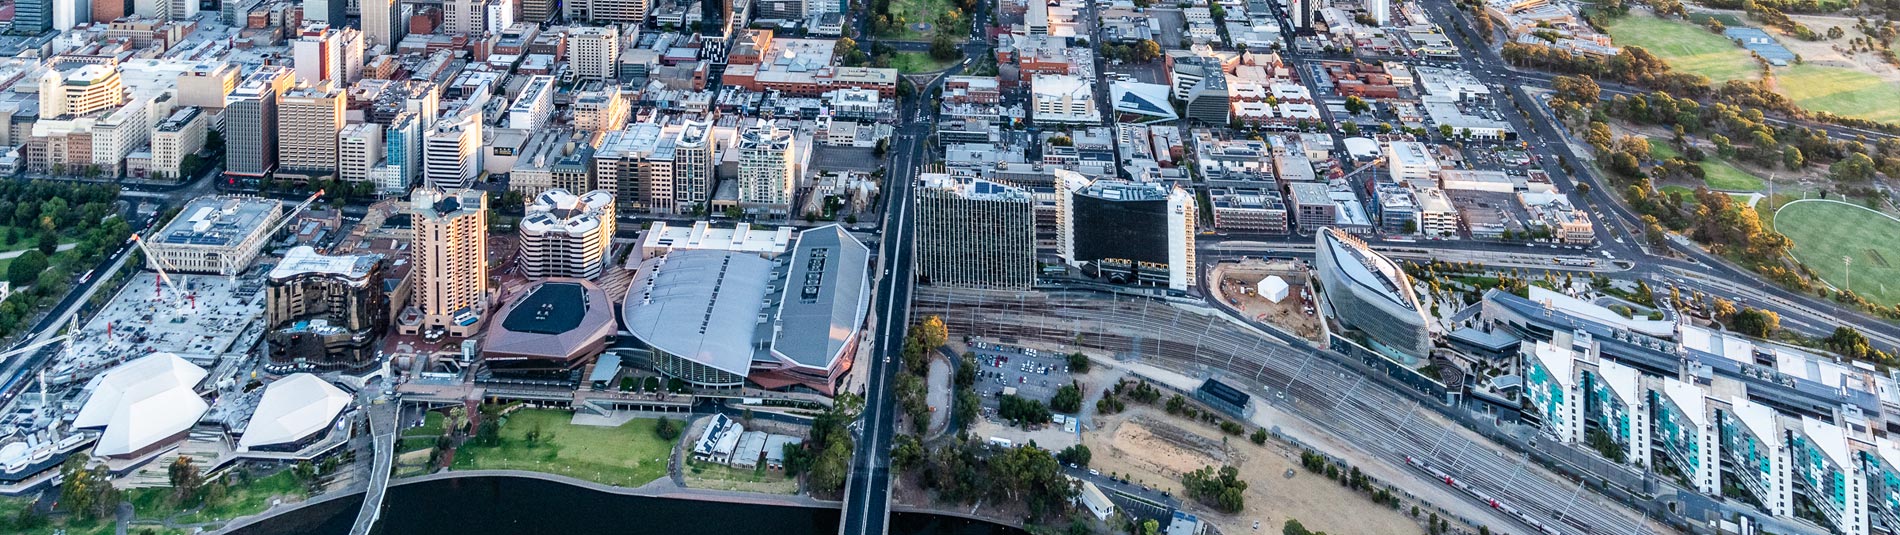 Aerial view of a northern section of Adelaide city